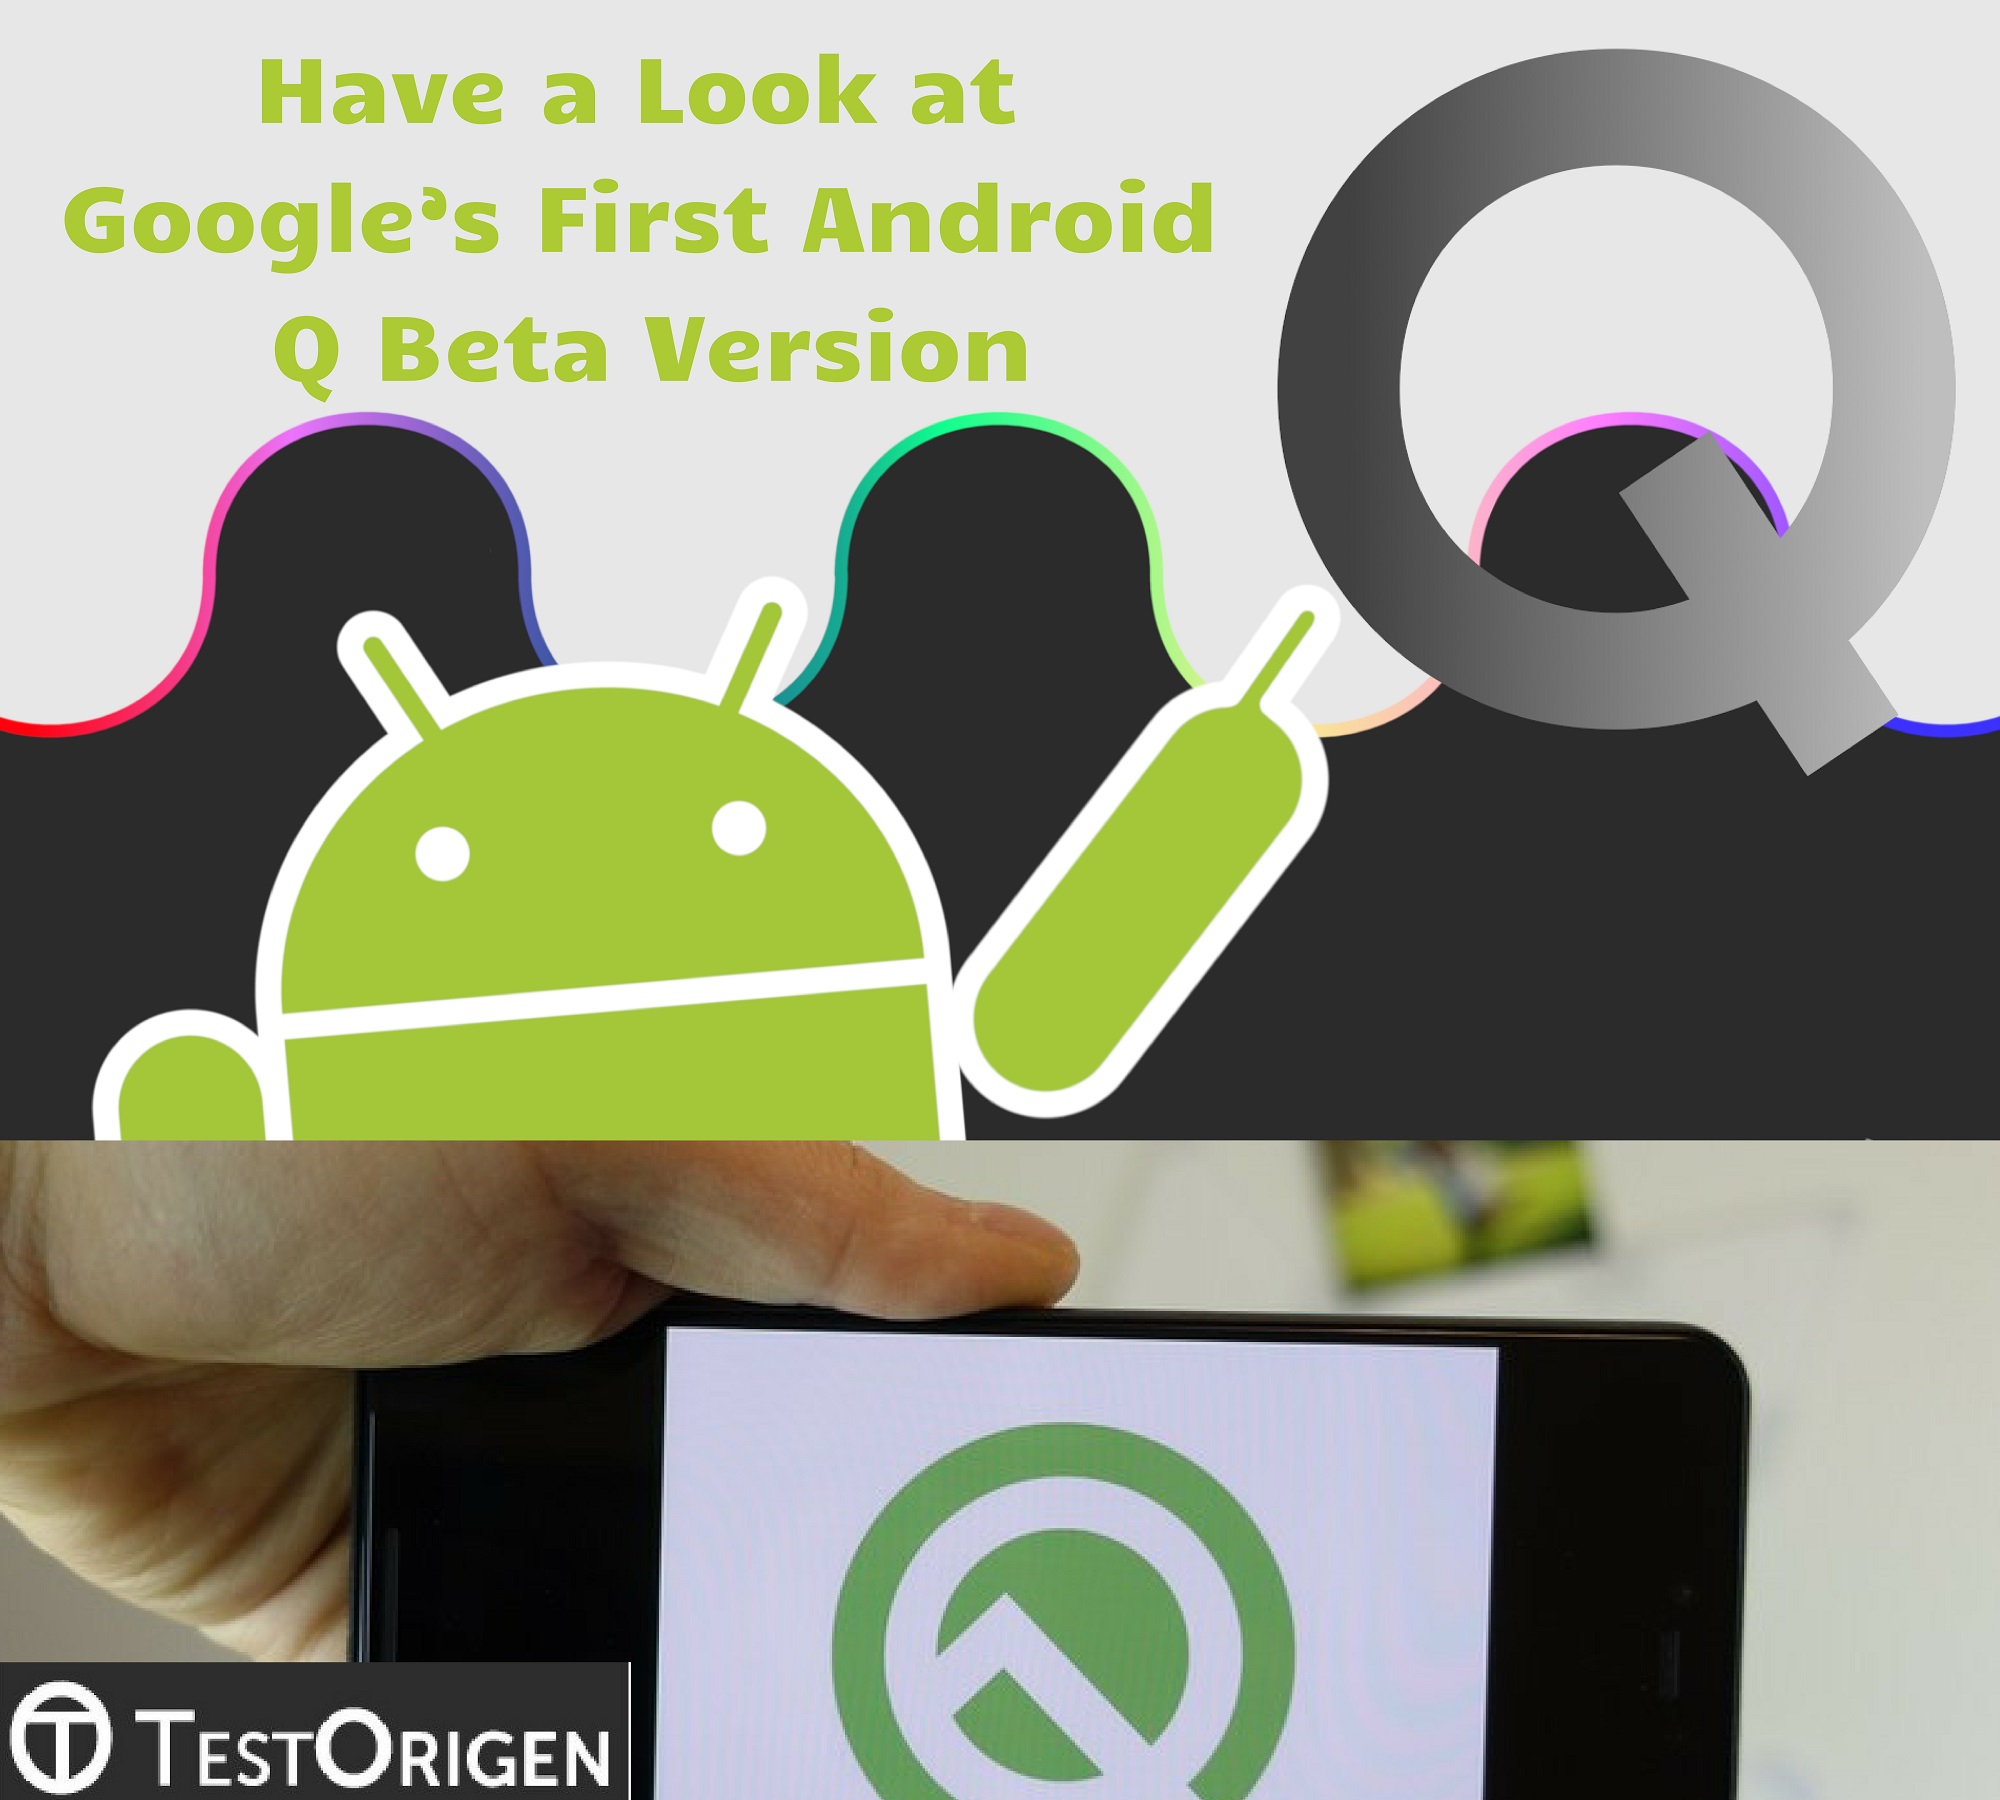 Have a Look at Google’s First Android Q Beta Version